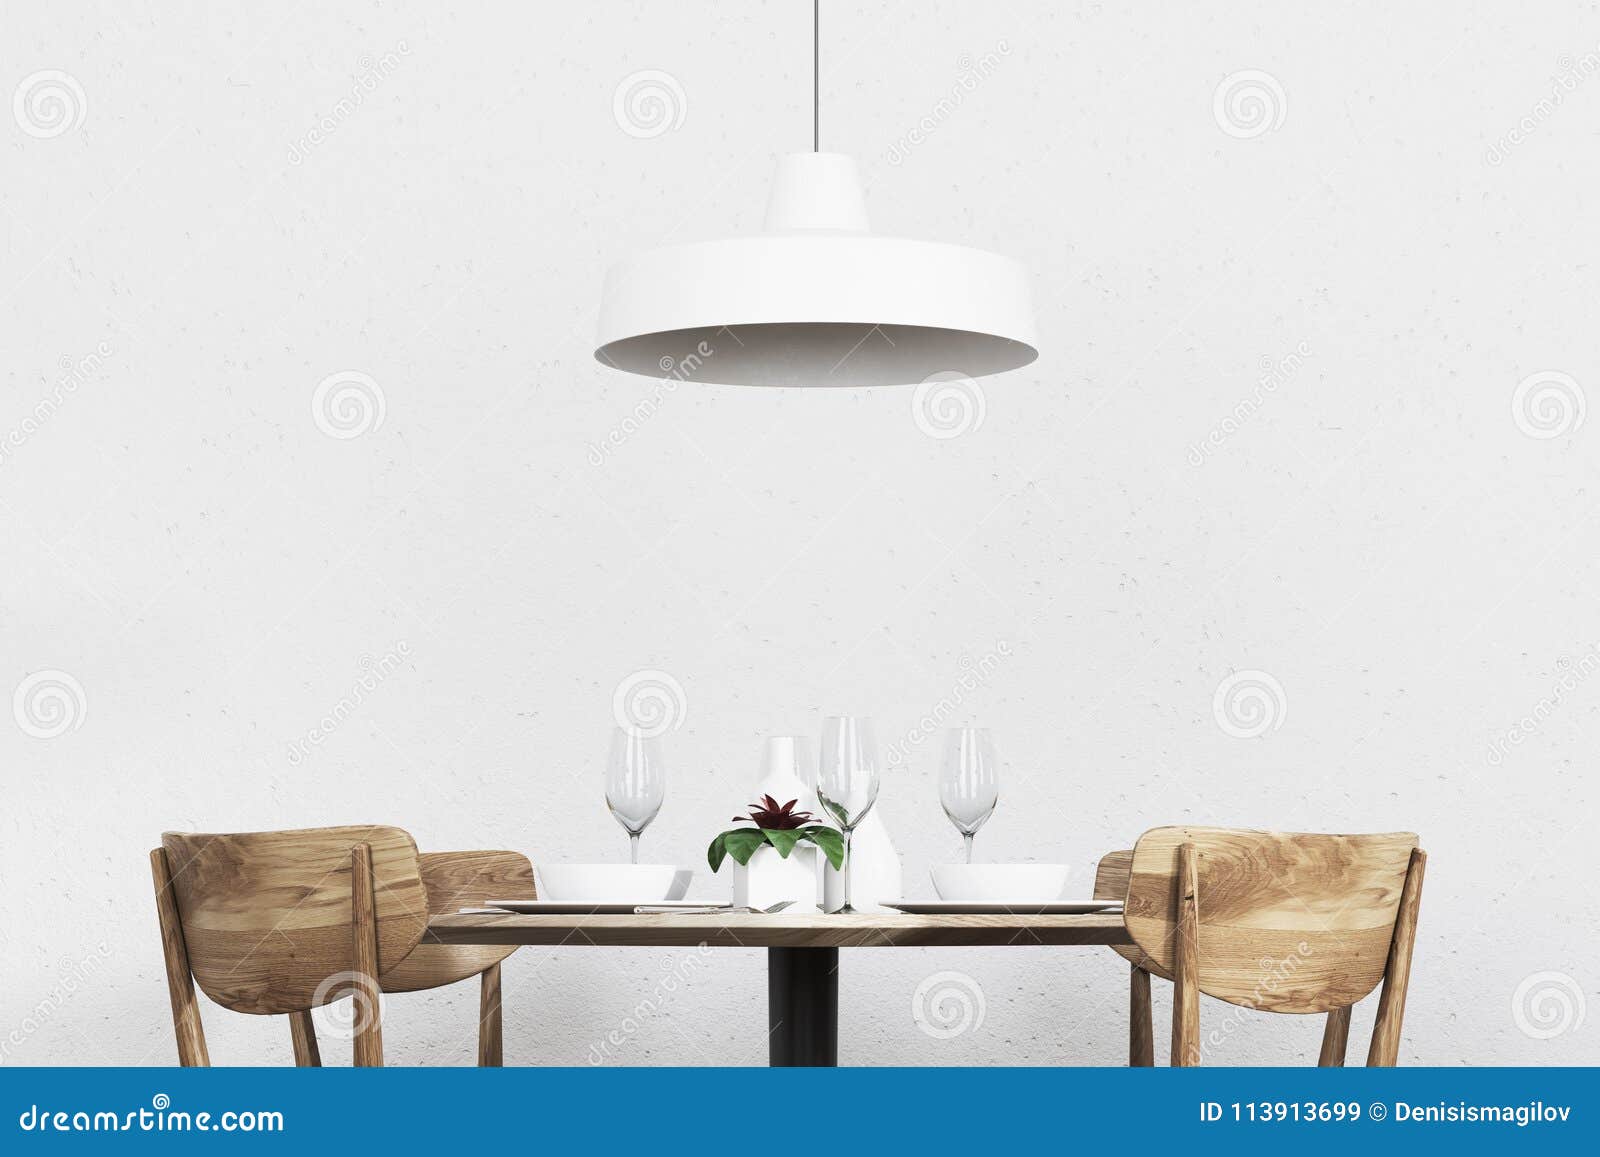 Round Table With Chairs In A Restaurant Stock Illustration